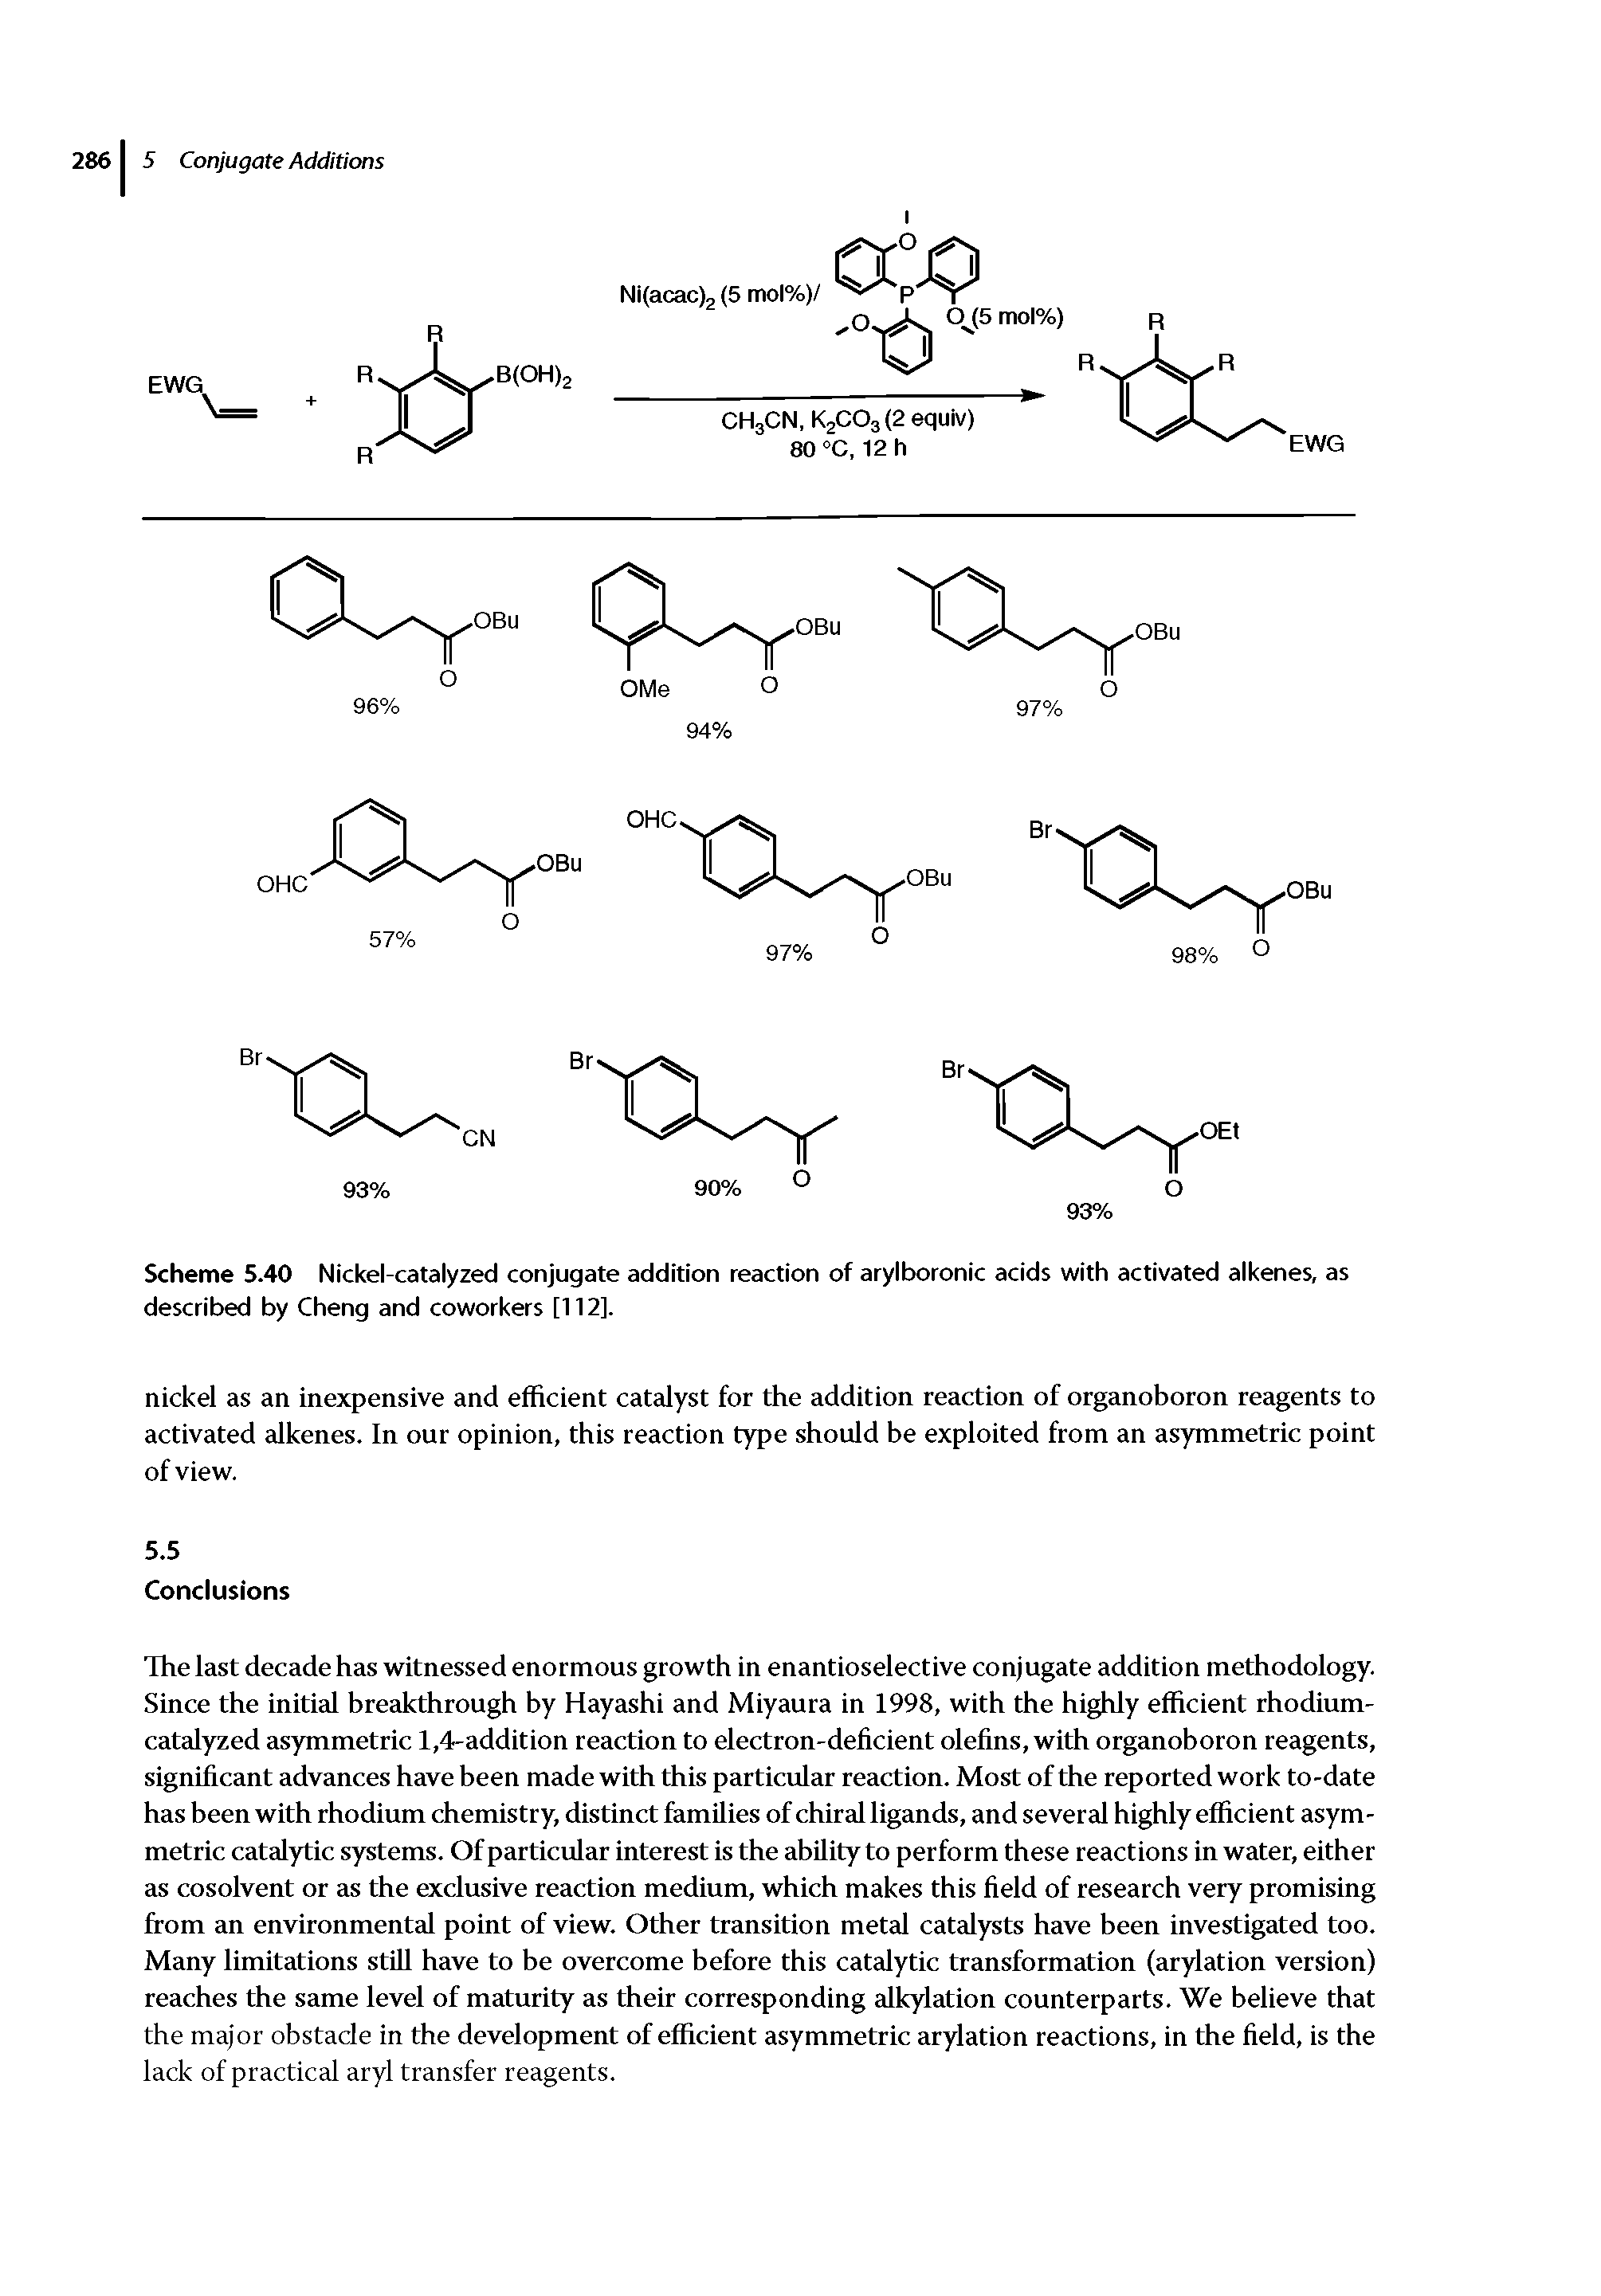 Scheme 5.40 Nickel-catalyzed conjugate addition reaction of arylboronic acids with activated alkenes, as described by Cheng and coworkers [112].